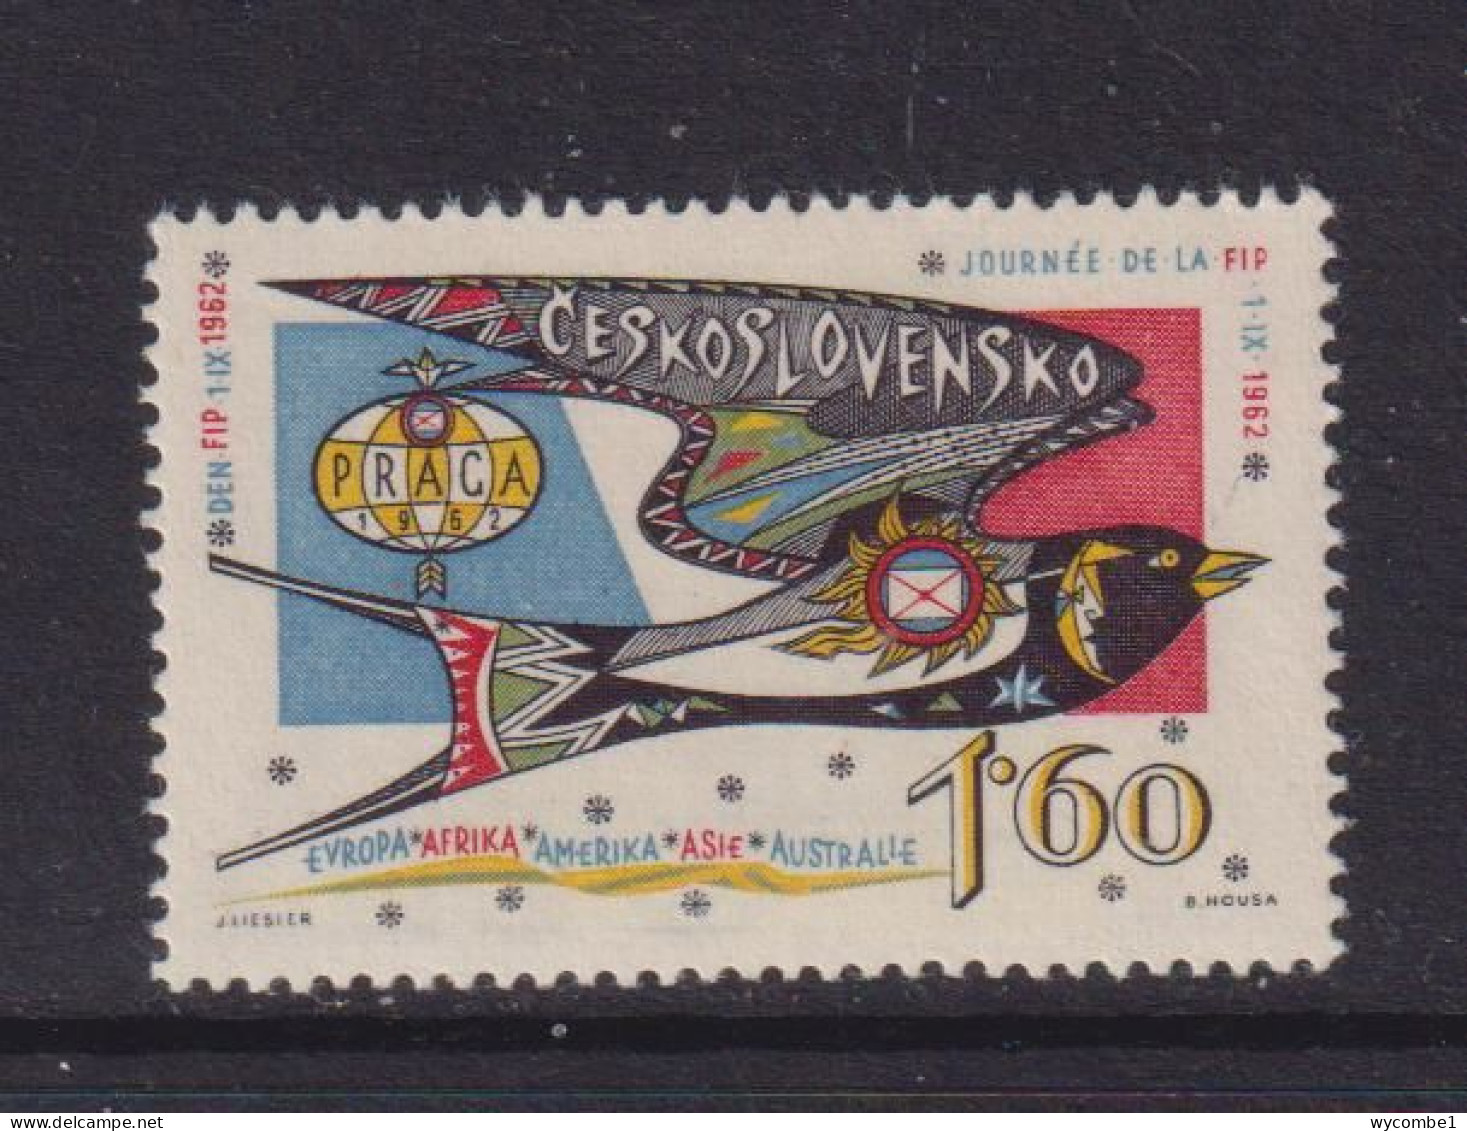 CZECHOSLOVAKIA  - 1962 FIP Day1k60 Never Hinged Mint - Unused Stamps